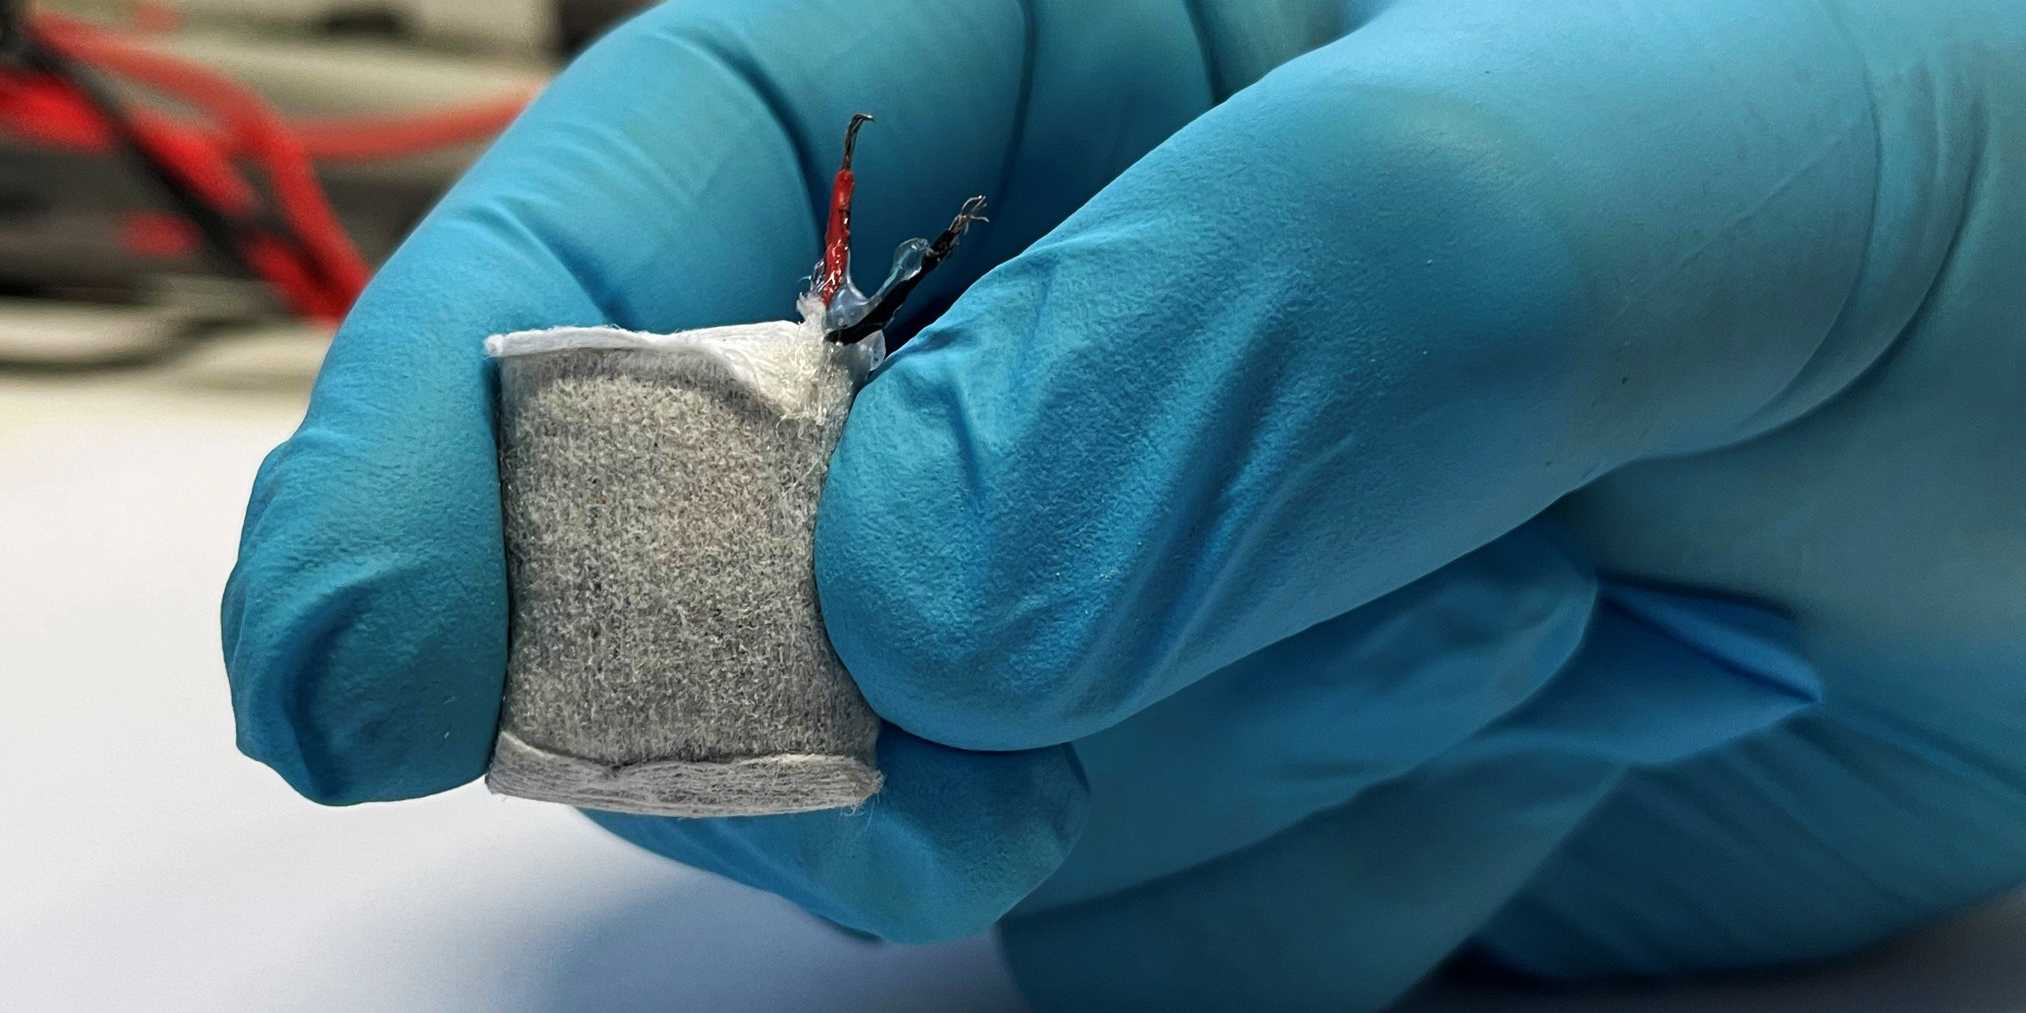 The fuel cell in the bag in a hand with a blue laboratory glove.